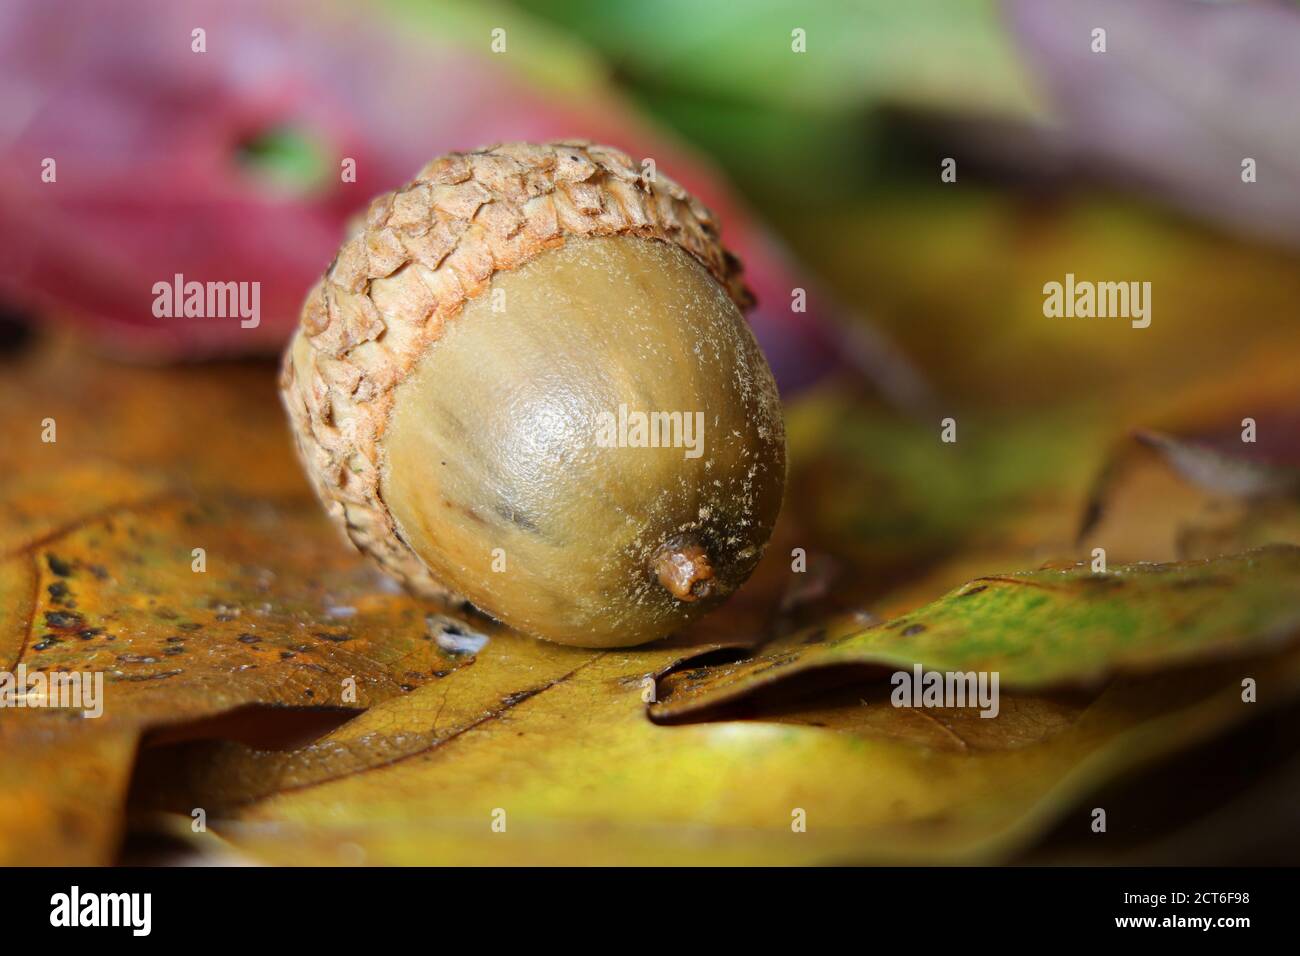 Close up of a brown acorn on fall leaves Stock Photo